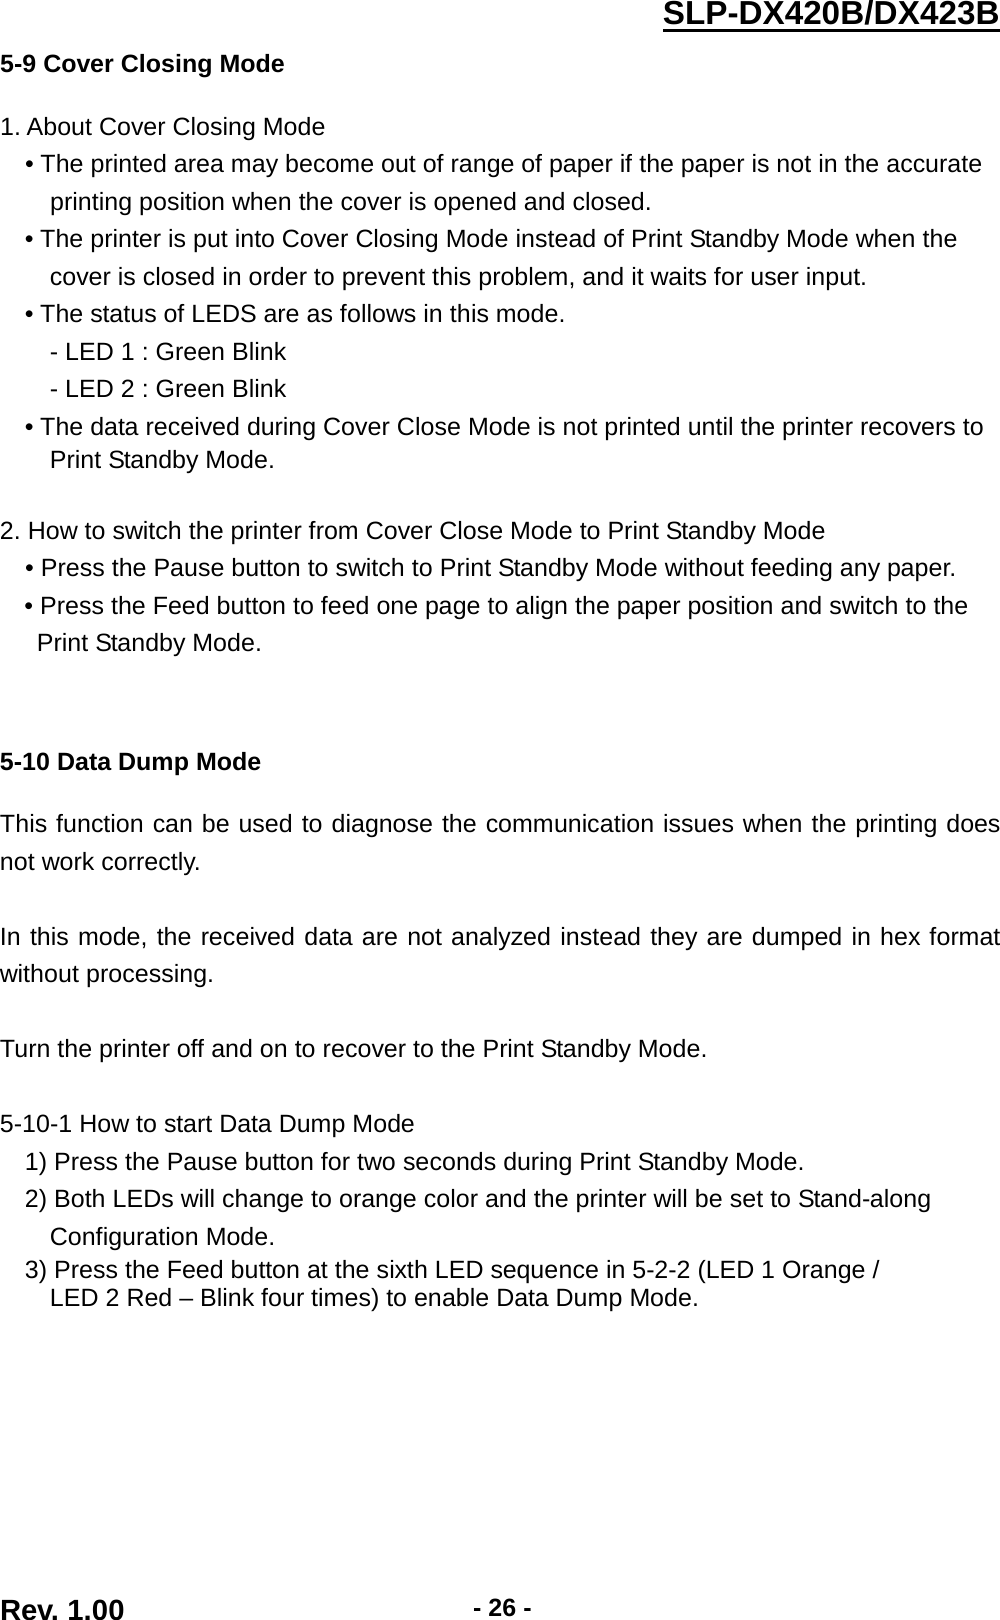  Rev. 1.00 - 26 - SLP-DX420B/DX423B  5-9 Cover Closing Mode  1. About Cover Closing Mode • The printed area may become out of range of paper if the paper is not in the accurate   printing position when the cover is opened and closed.   • The printer is put into Cover Closing Mode instead of Print Standby Mode when the   cover is closed in order to prevent this problem, and it waits for user input. • The status of LEDS are as follows in this mode. - LED 1 : Green Blink   - LED 2 : Green Blink • The data received during Cover Close Mode is not printed until the printer recovers to   Print Standby Mode.  2. How to switch the printer from Cover Close Mode to Print Standby Mode • Press the Pause button to switch to Print Standby Mode without feeding any paper. • Press the Feed button to feed one page to align the paper position and switch to the   Print Standby Mode.      5-10 Data Dump Mode  This function can be used to diagnose the communication issues when the printing does not work correctly.  In this mode, the received data are not analyzed instead they are dumped in hex format without processing.  Turn the printer off and on to recover to the Print Standby Mode.    5-10-1 How to start Data Dump Mode 1) Press the Pause button for two seconds during Print Standby Mode. 2) Both LEDs will change to orange color and the printer will be set to Stand-along   Configuration Mode. 3) Press the Feed button at the sixth LED sequence in 5-2-2 (LED 1 Orange /   LED 2 Red – Blink four times) to enable Data Dump Mode. 